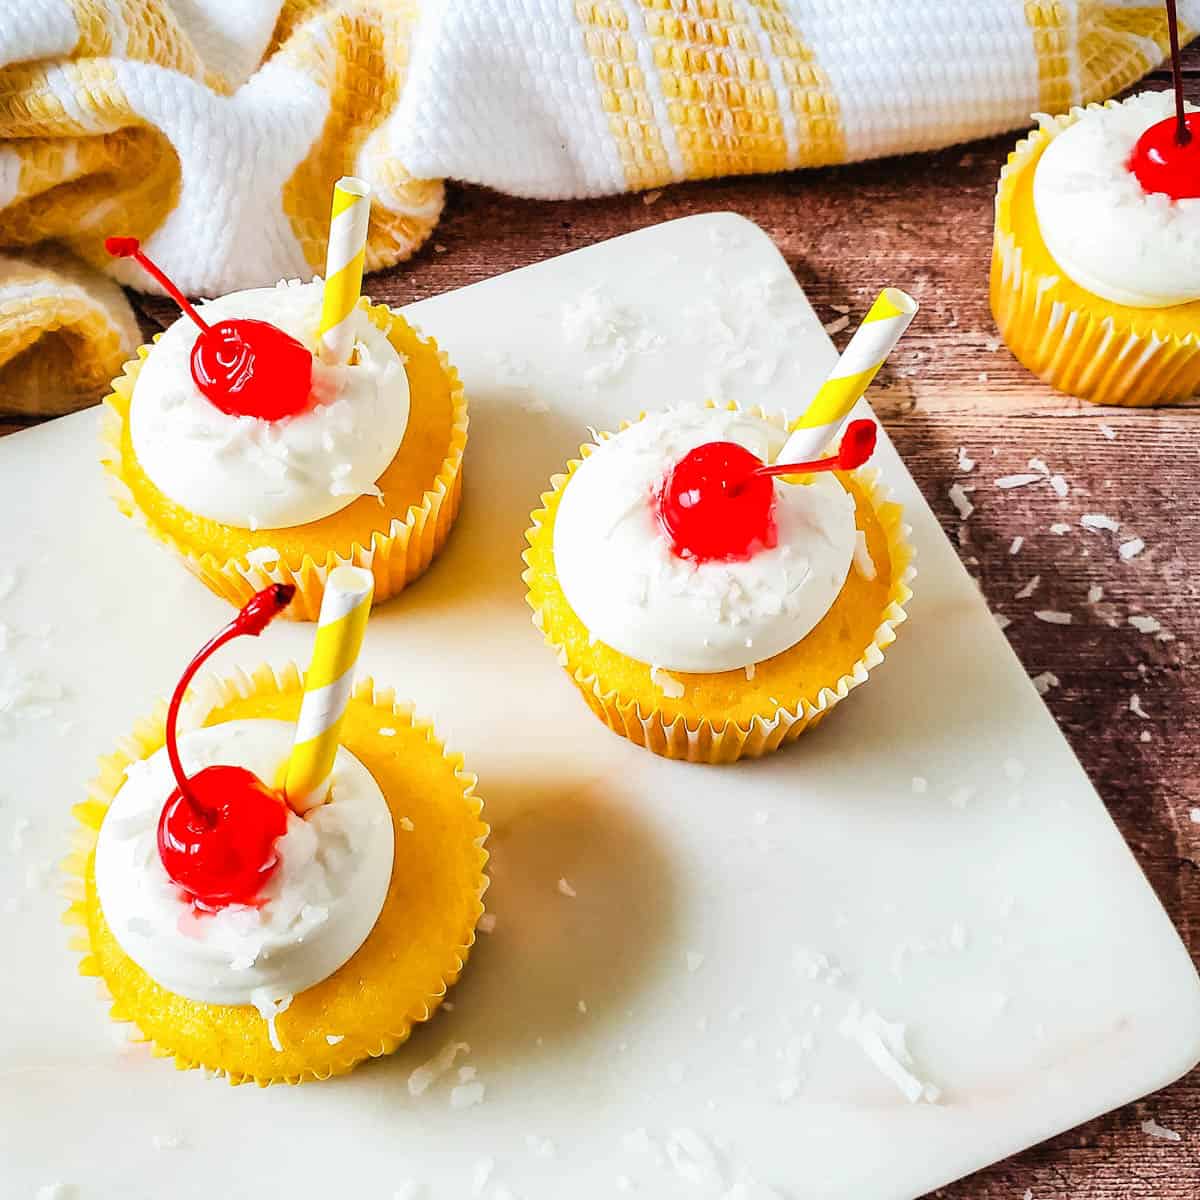 Boozy pina colada cupcakes with vanilla frosting and maraschino cherries on a plate.